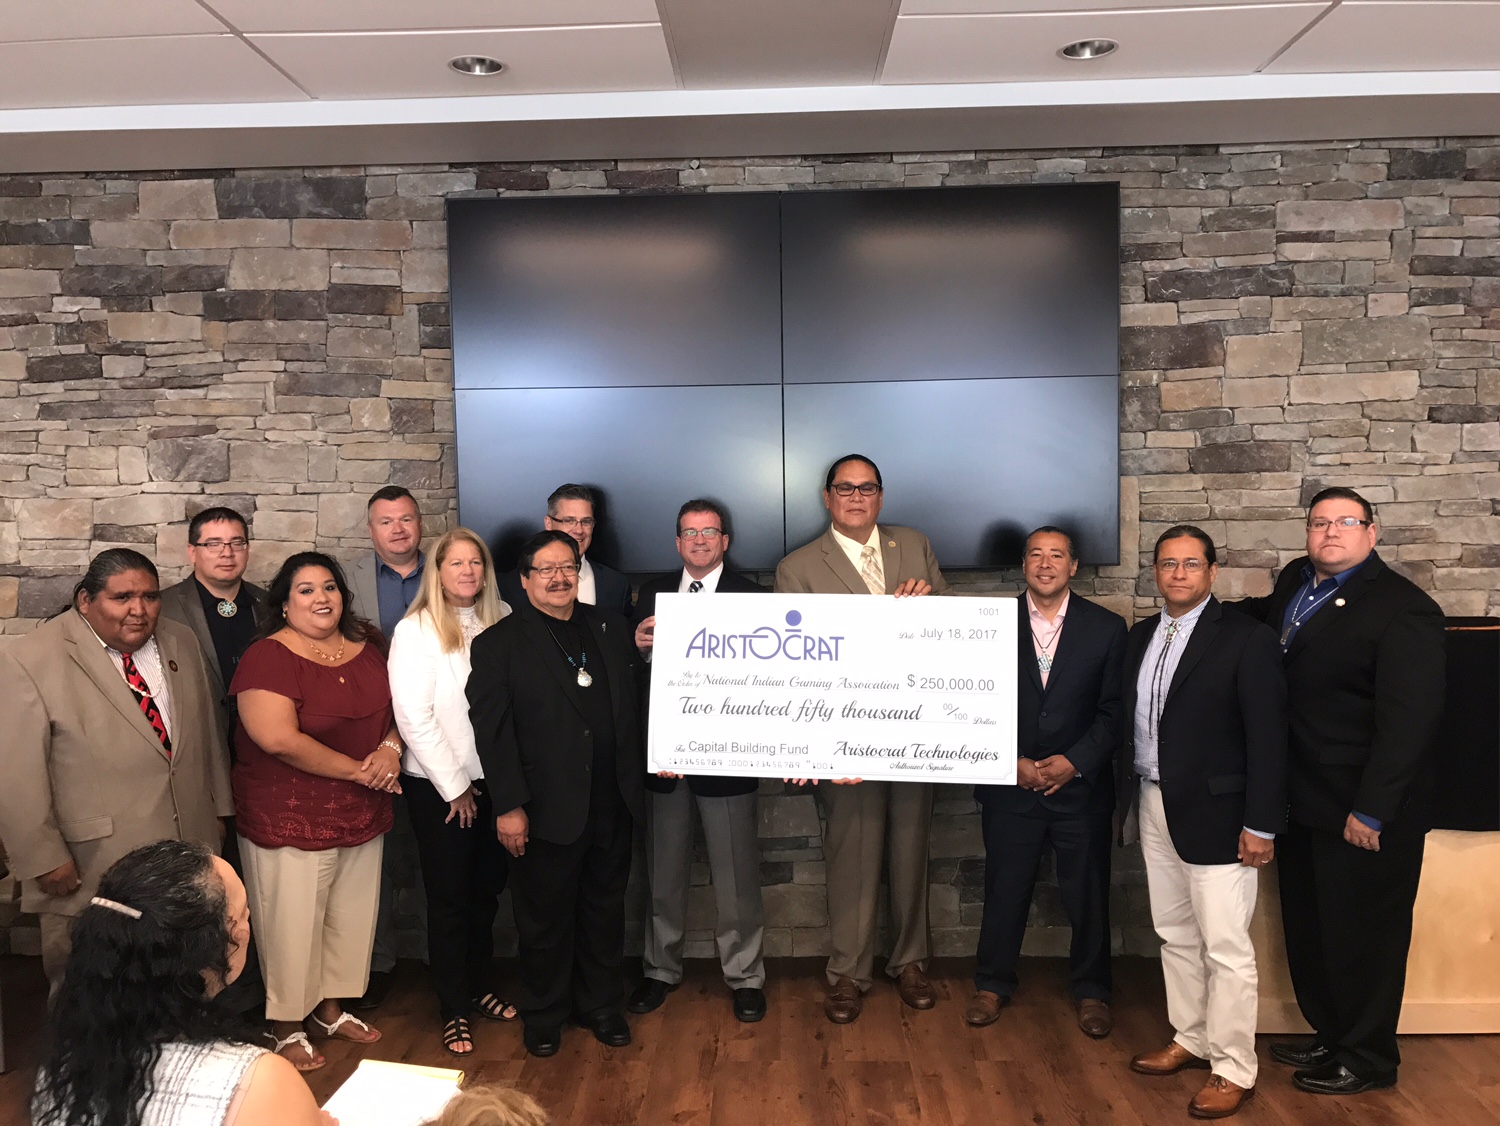 VGT Presents a Check to the National Indian Gaming Association